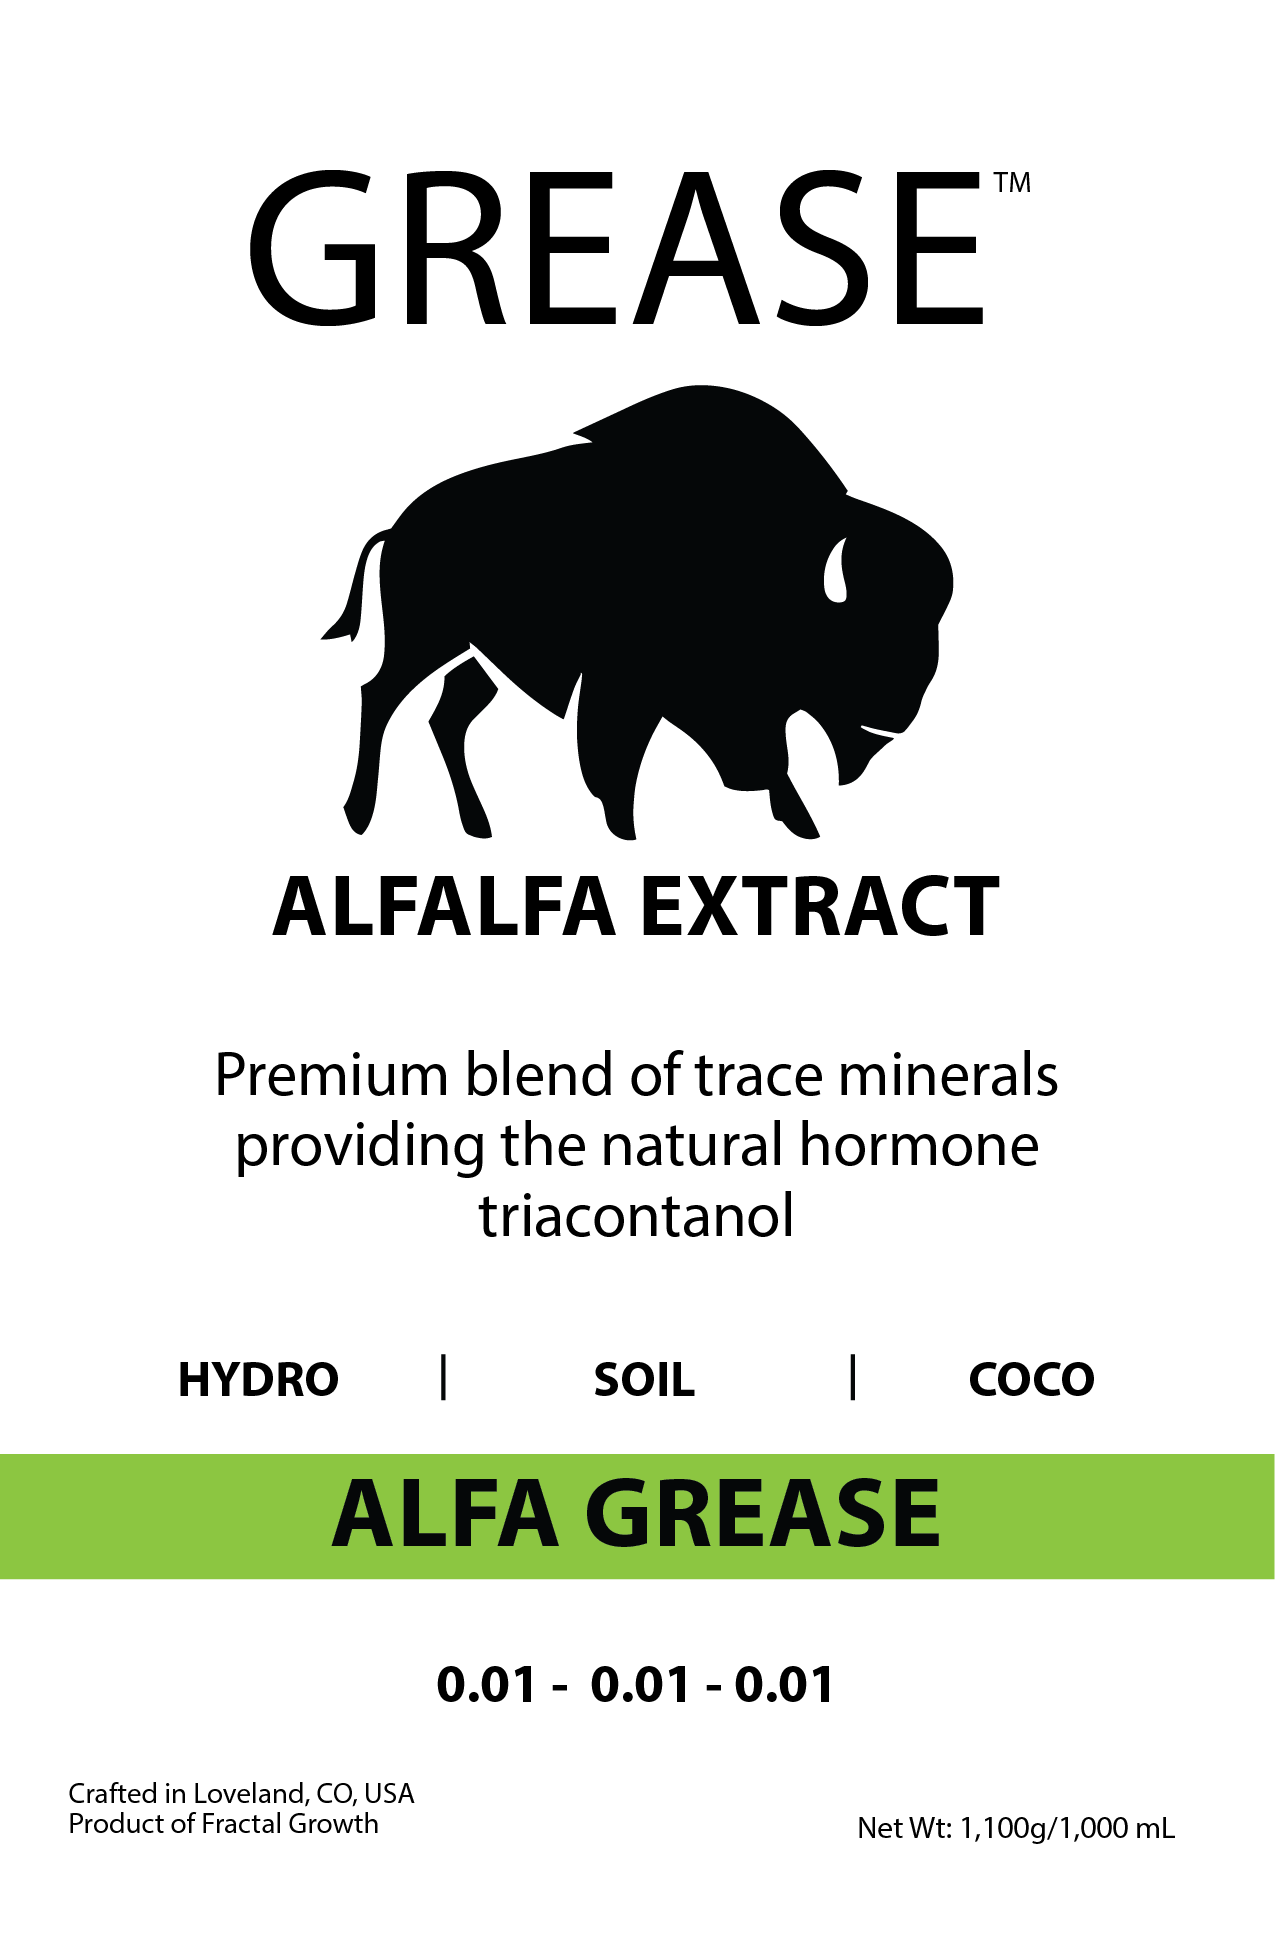 Afla Grease Wholesale